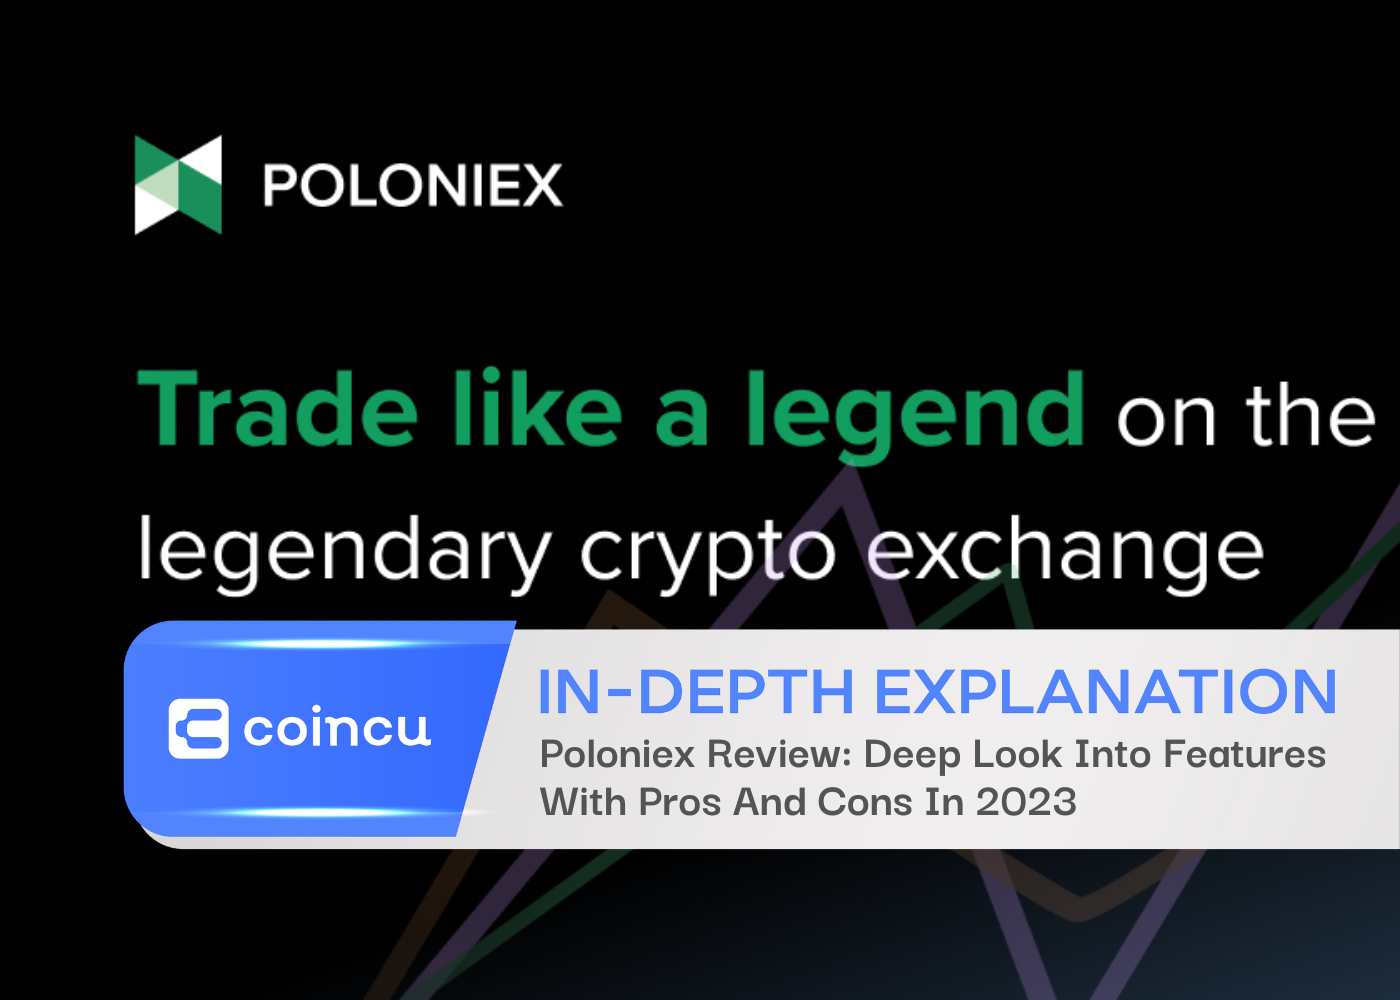 Poloniex Review: Deep Look Into Features With Pros And Cons In 2023